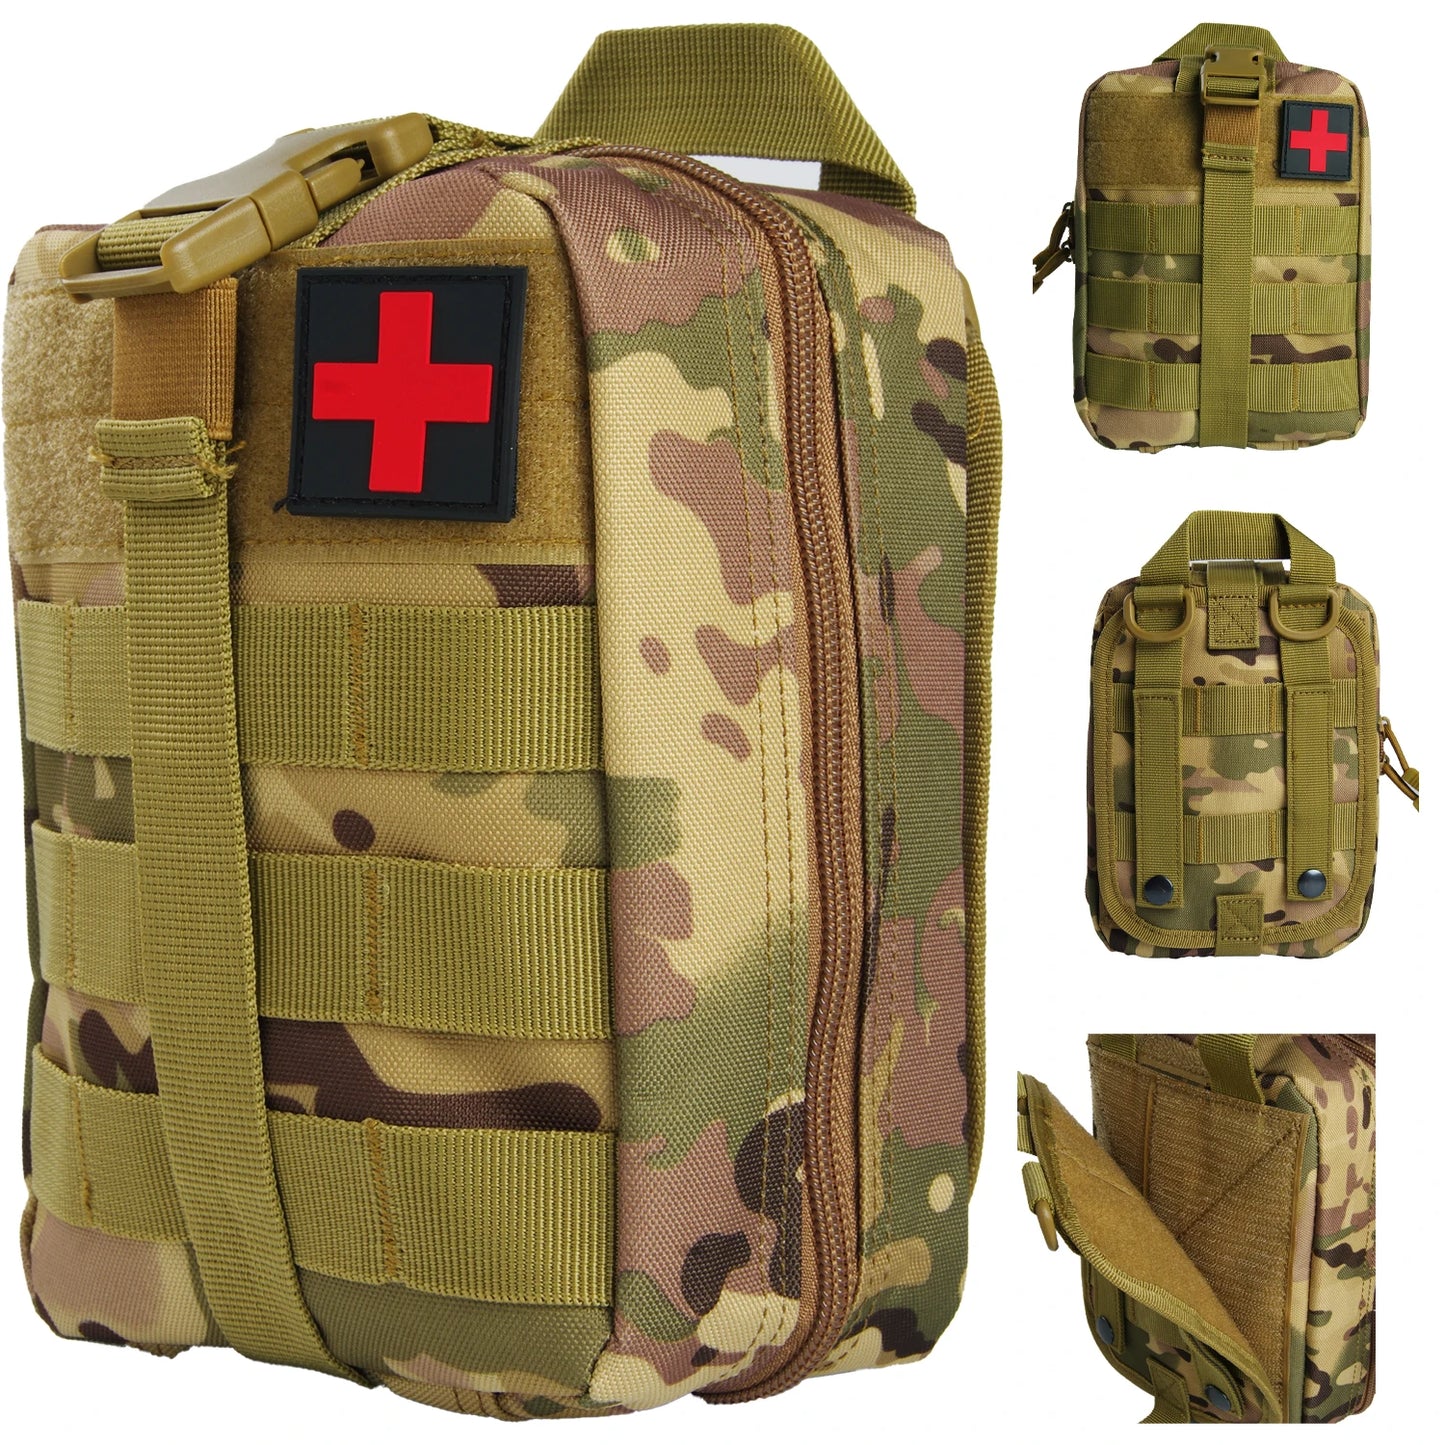 Military Trauma Survival Medical Pouch Kit